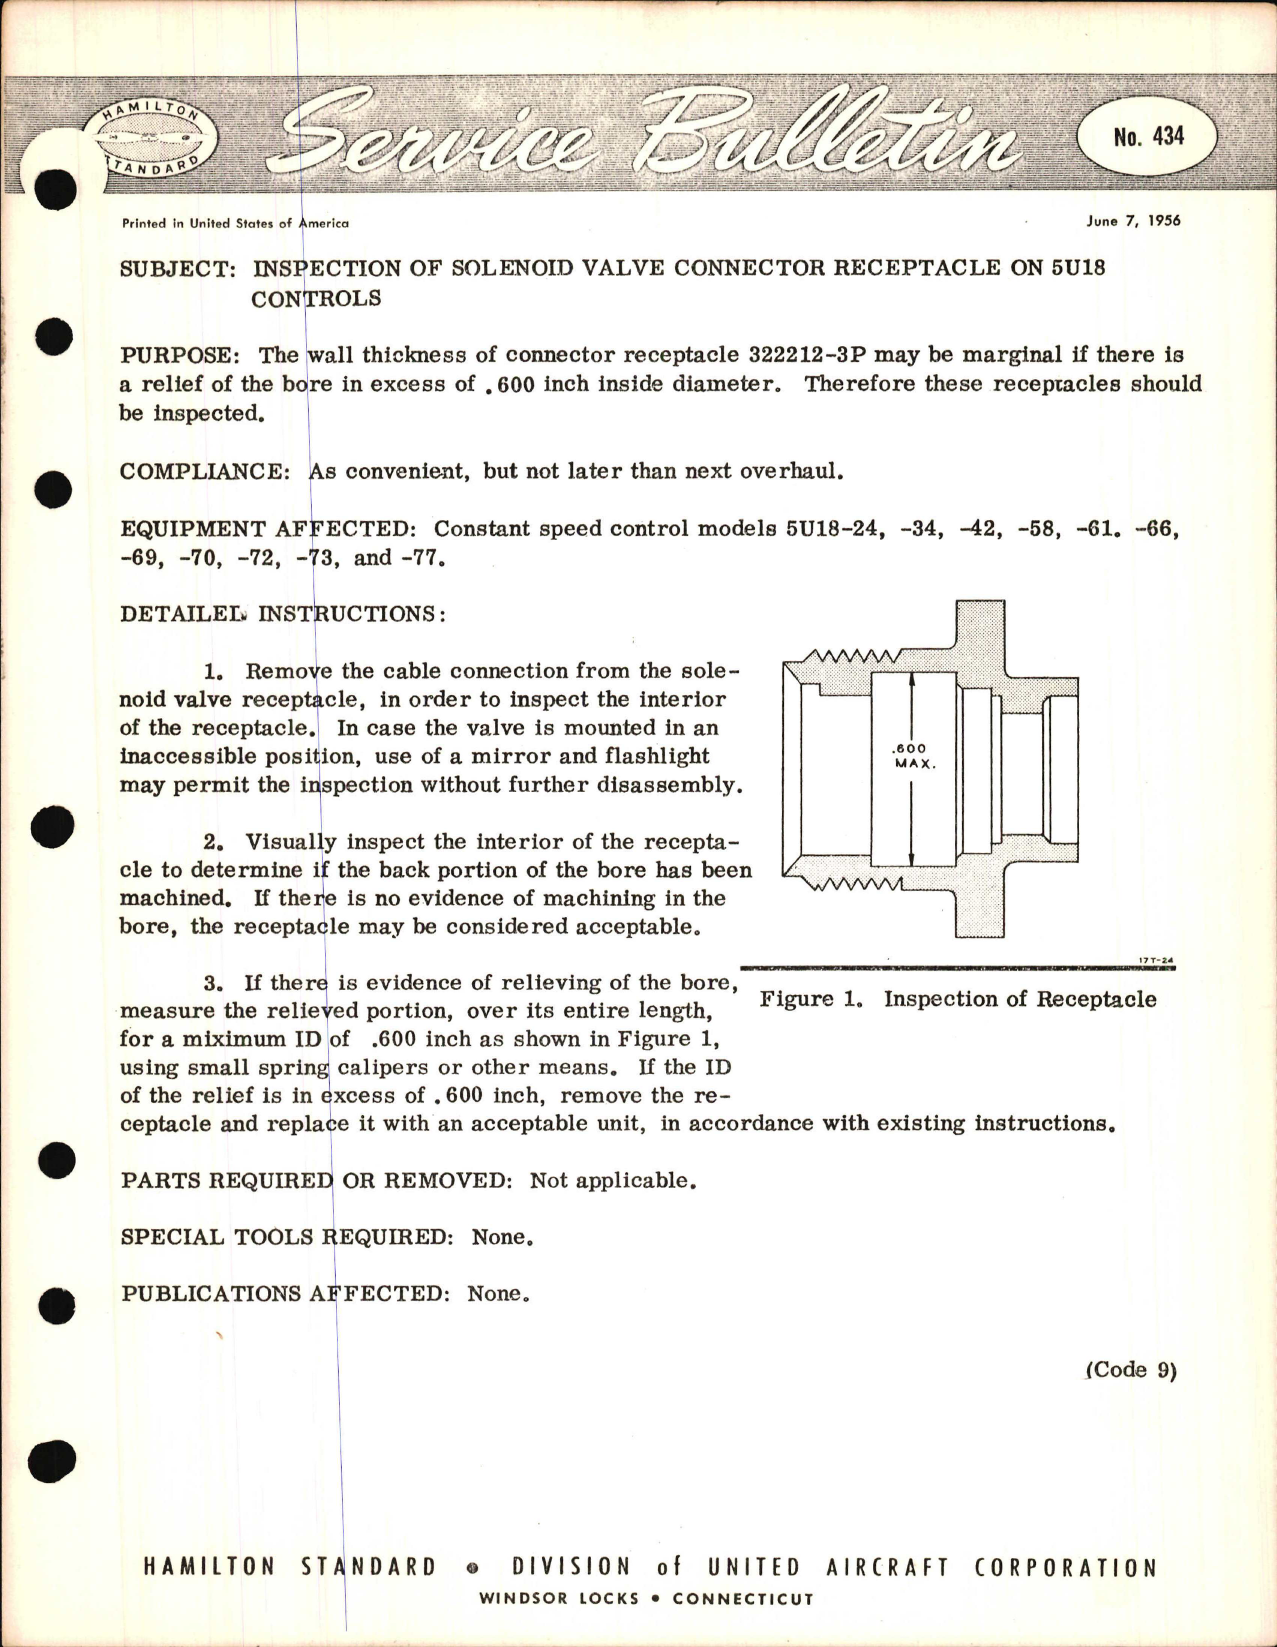 Sample page 1 from AirCorps Library document: Inspection of Solenoid Valve Connector Receptacle on 5U18 Controls